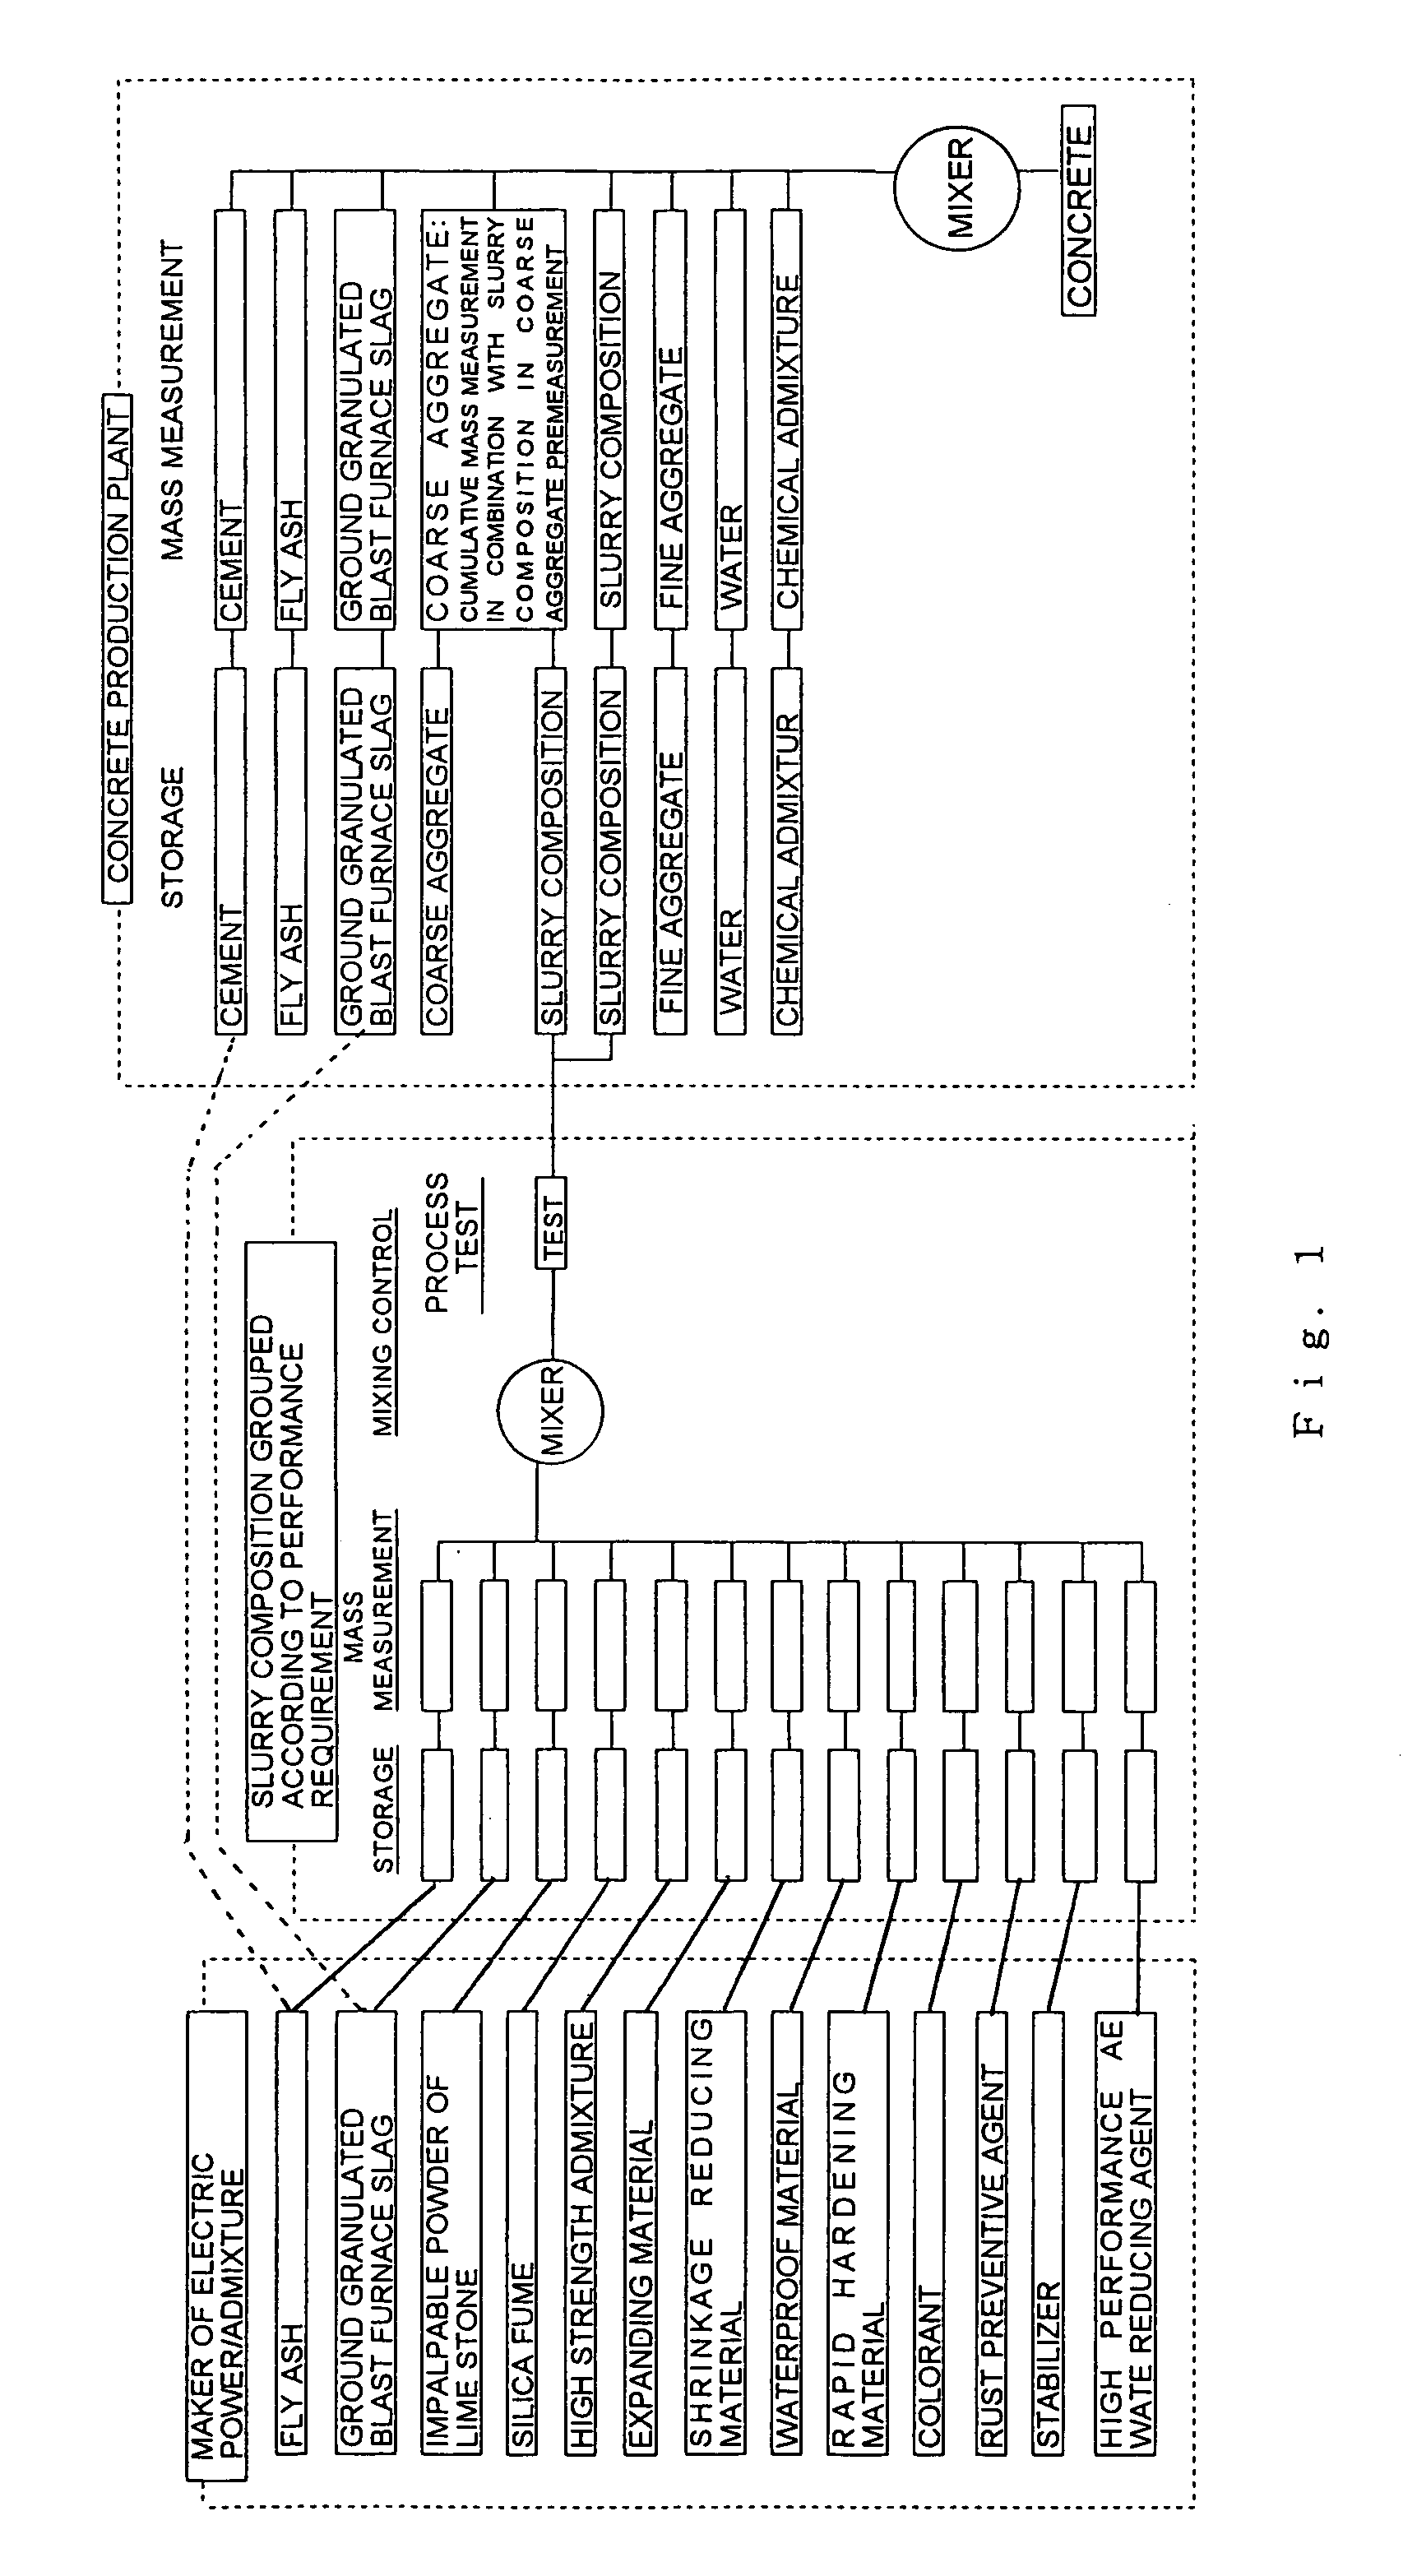 Method for producing concrete and standardizing system for concrete production